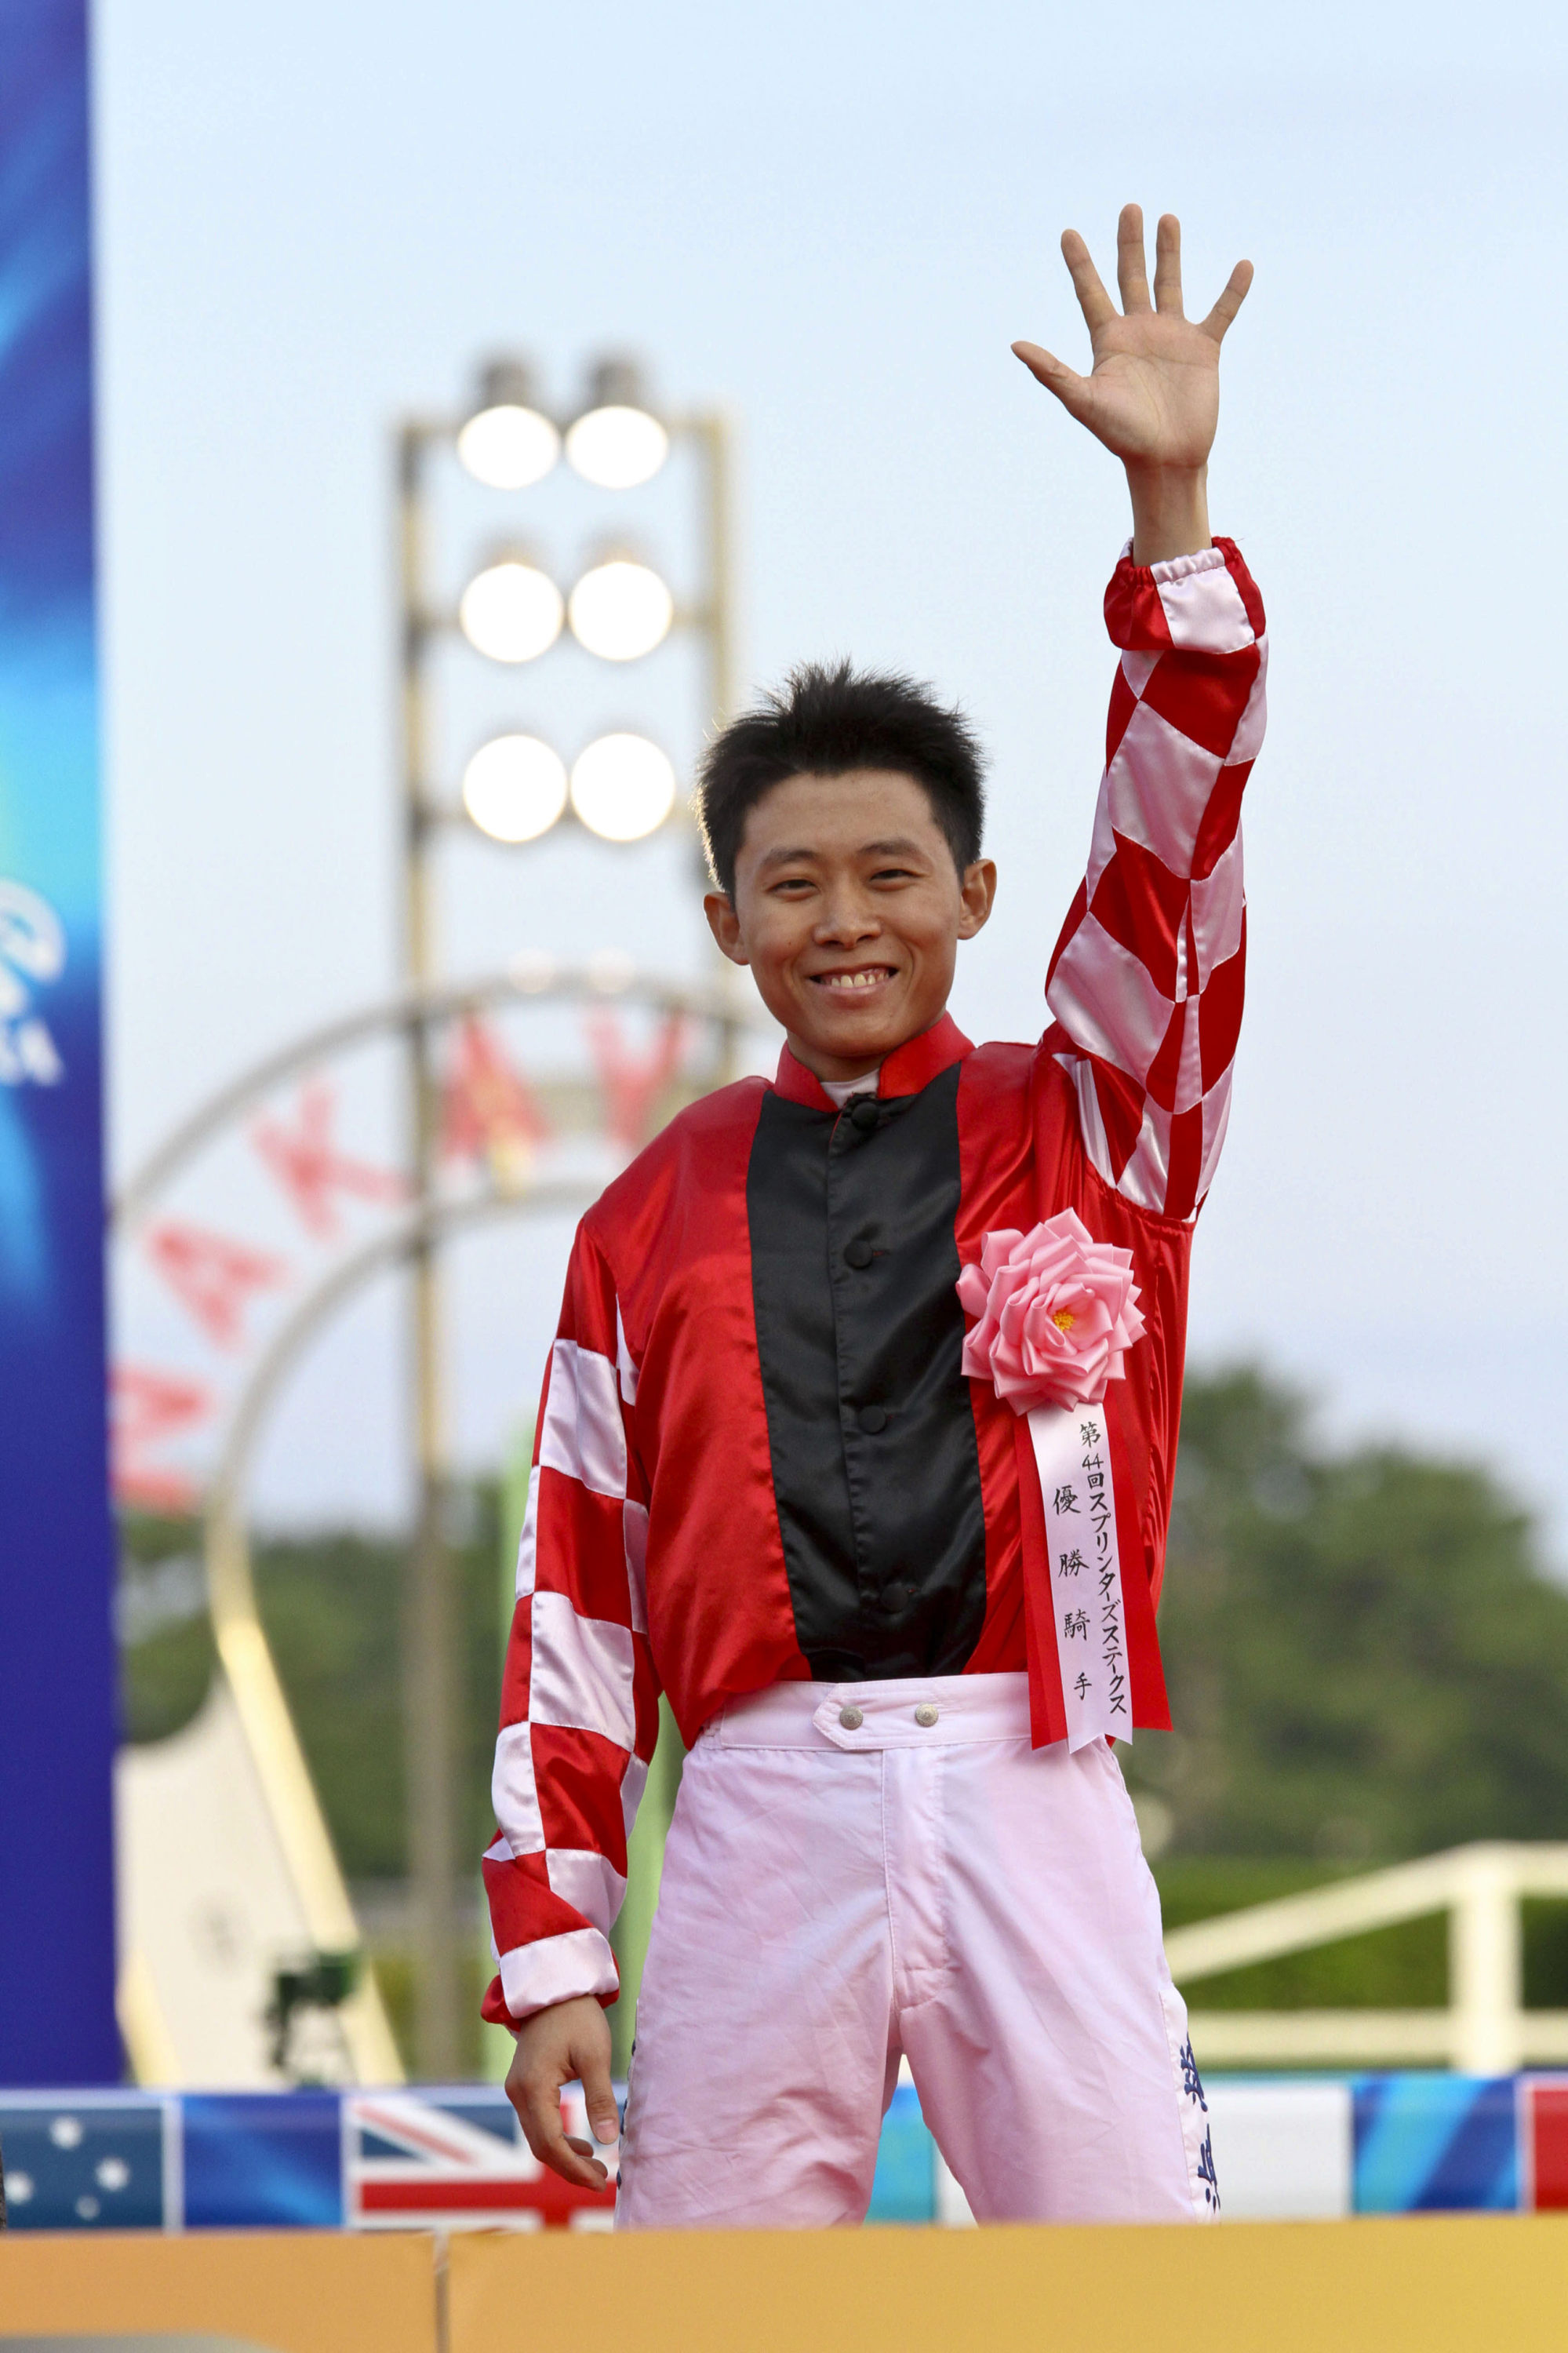 Alex Lai celebrates after winning the Sprinters Stakes aboard Ultra Fantasy in 2010.